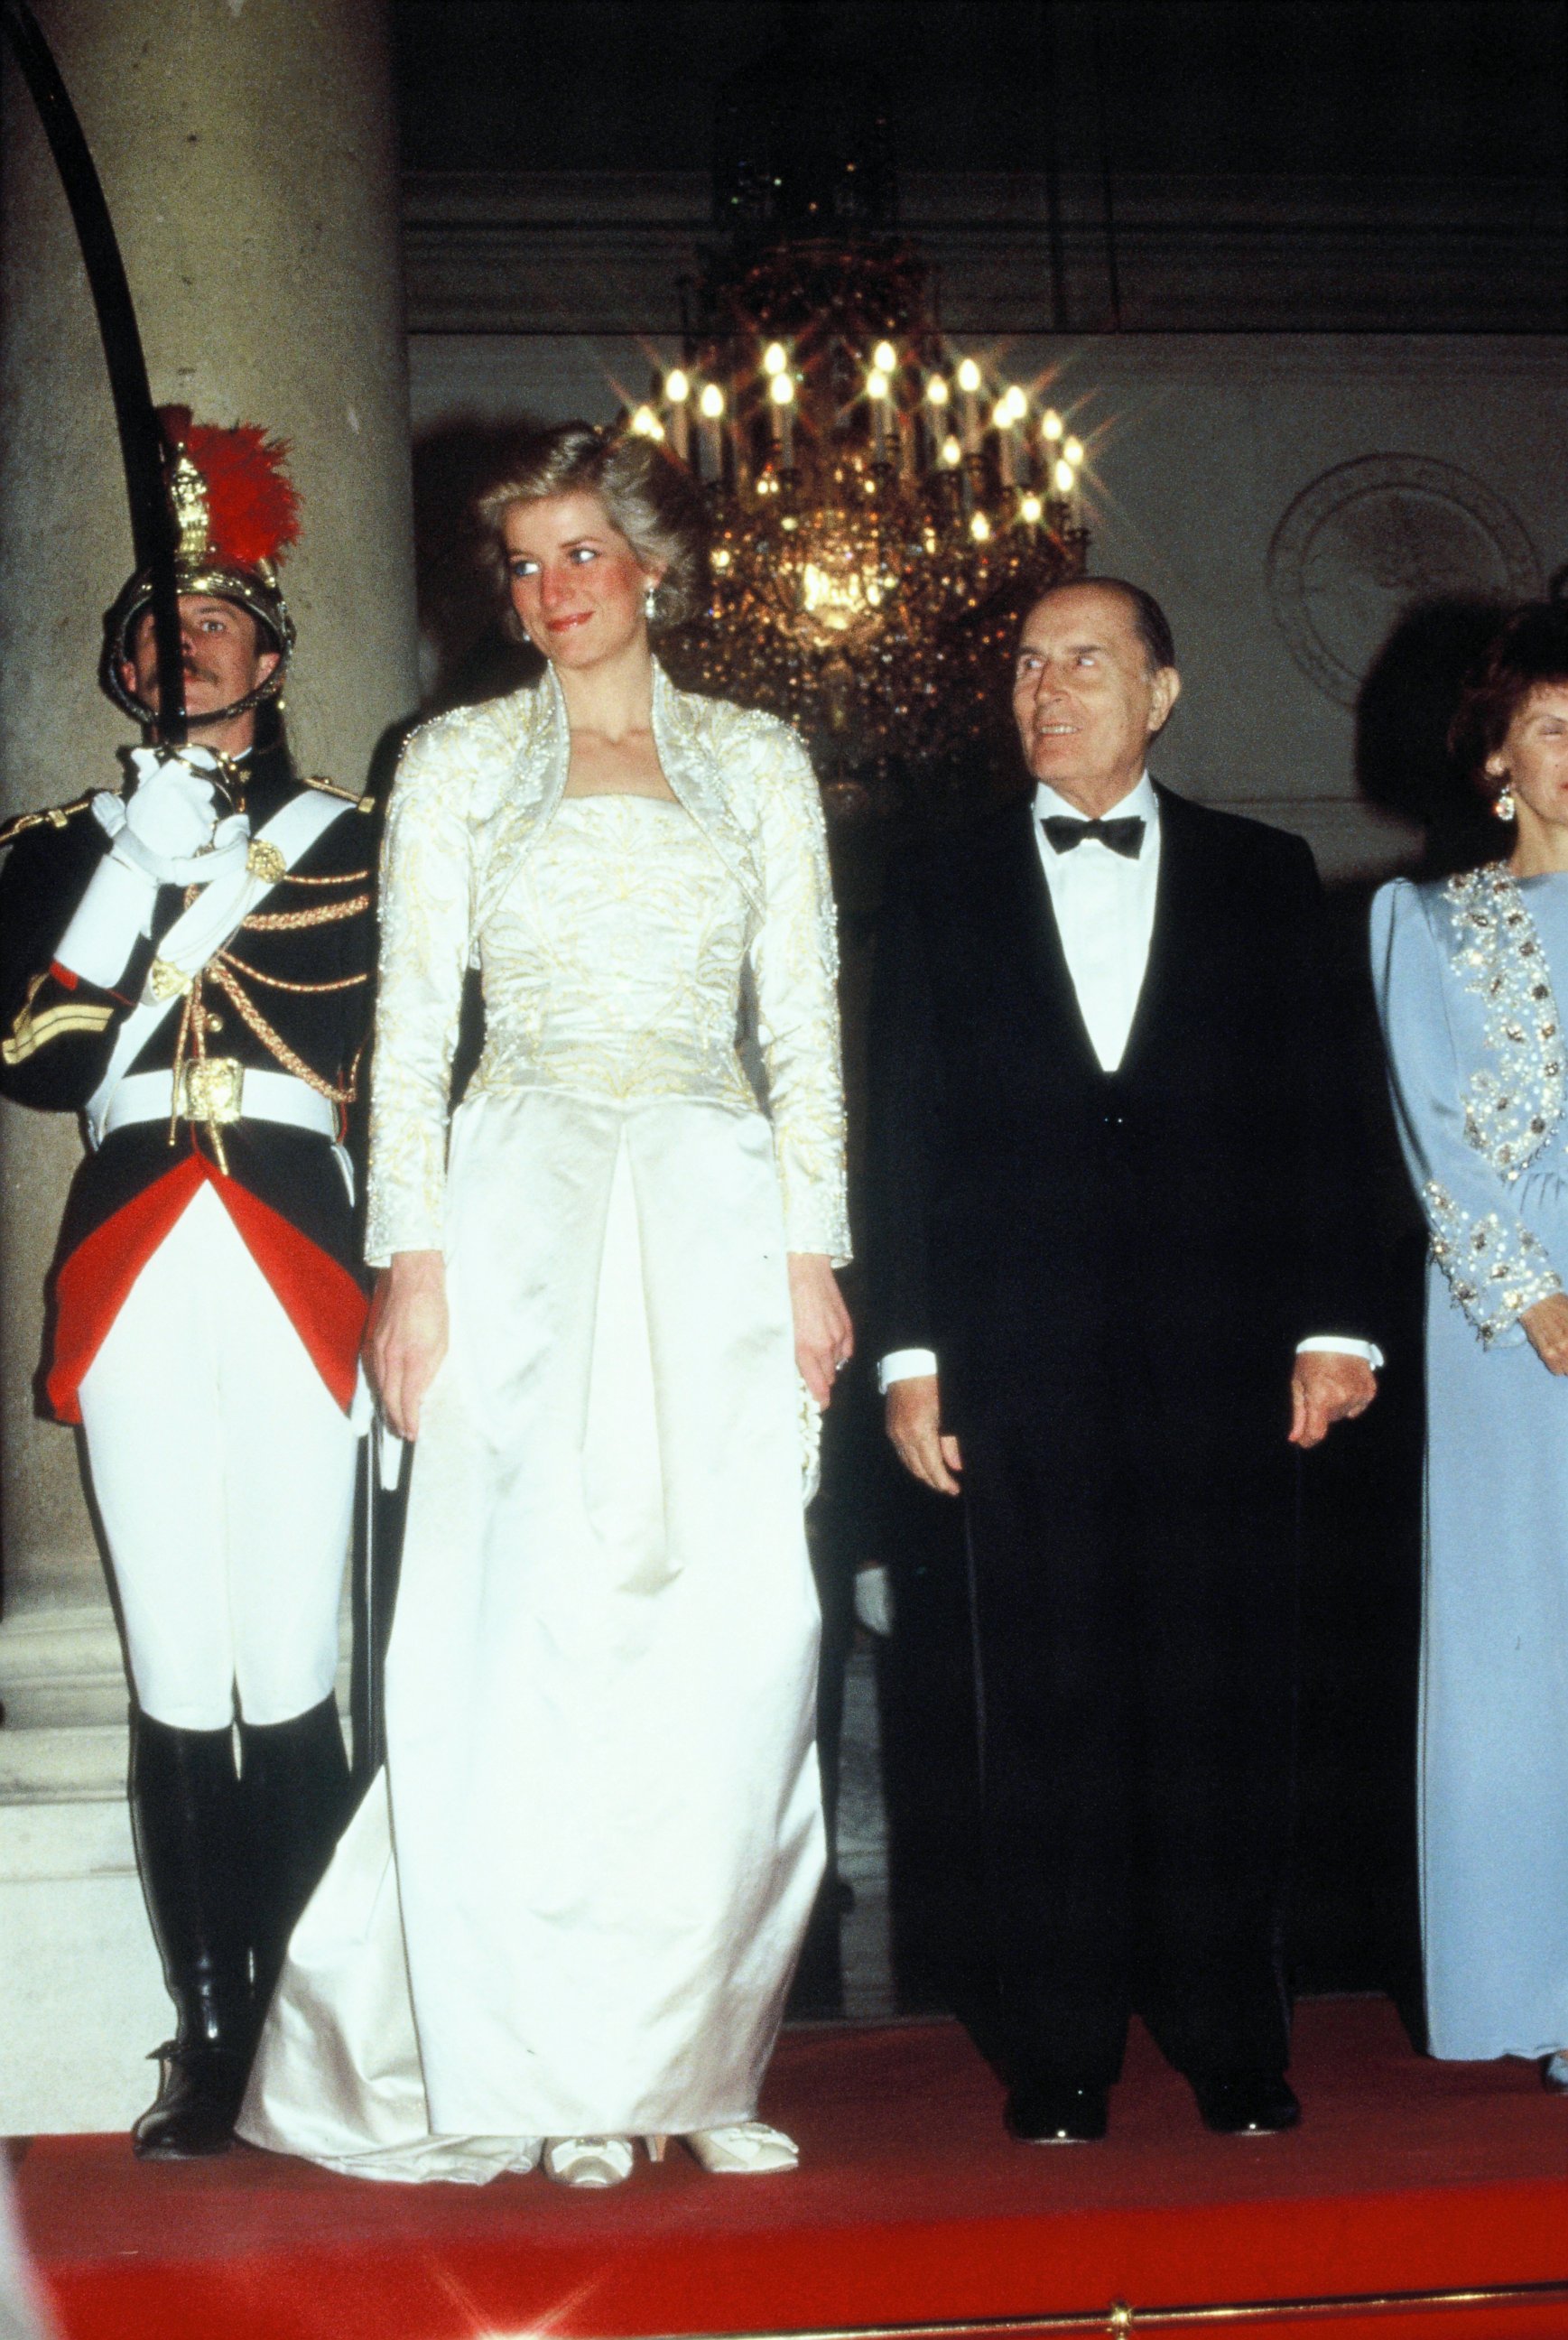 PHOTO: Diana, Princess of Wales, and former French President Francois Mitterrand attend a banquet at the Elysee Palace during her official visit to France on Nov. 7, 1988, in Paris.